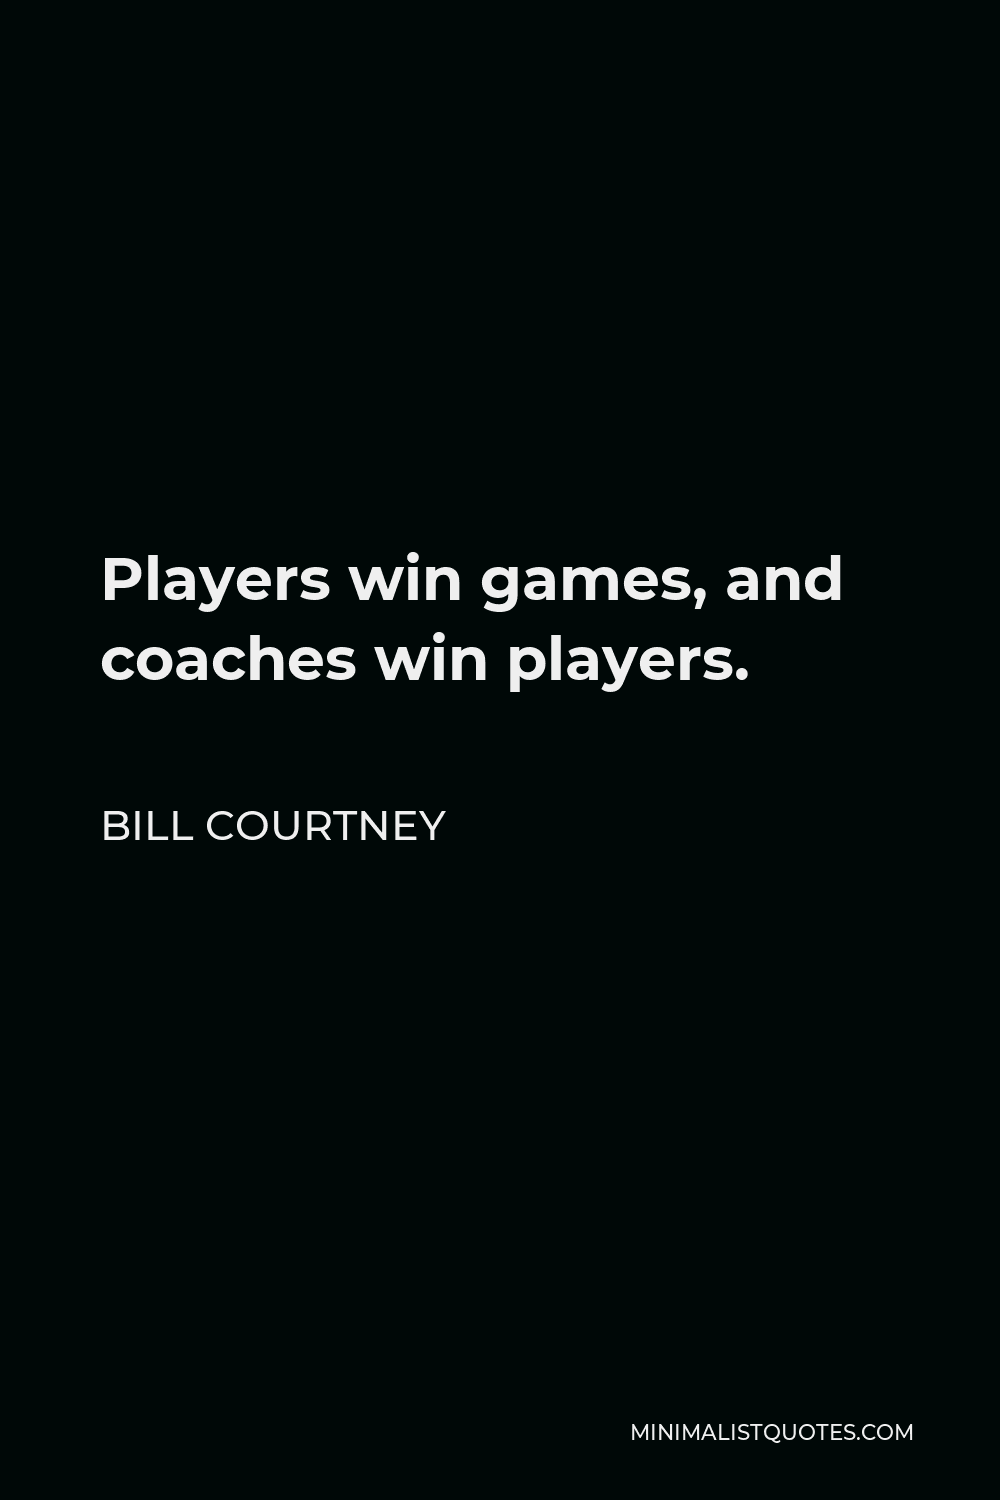 Bill Courtney Quote - Players win games, and coaches win players.